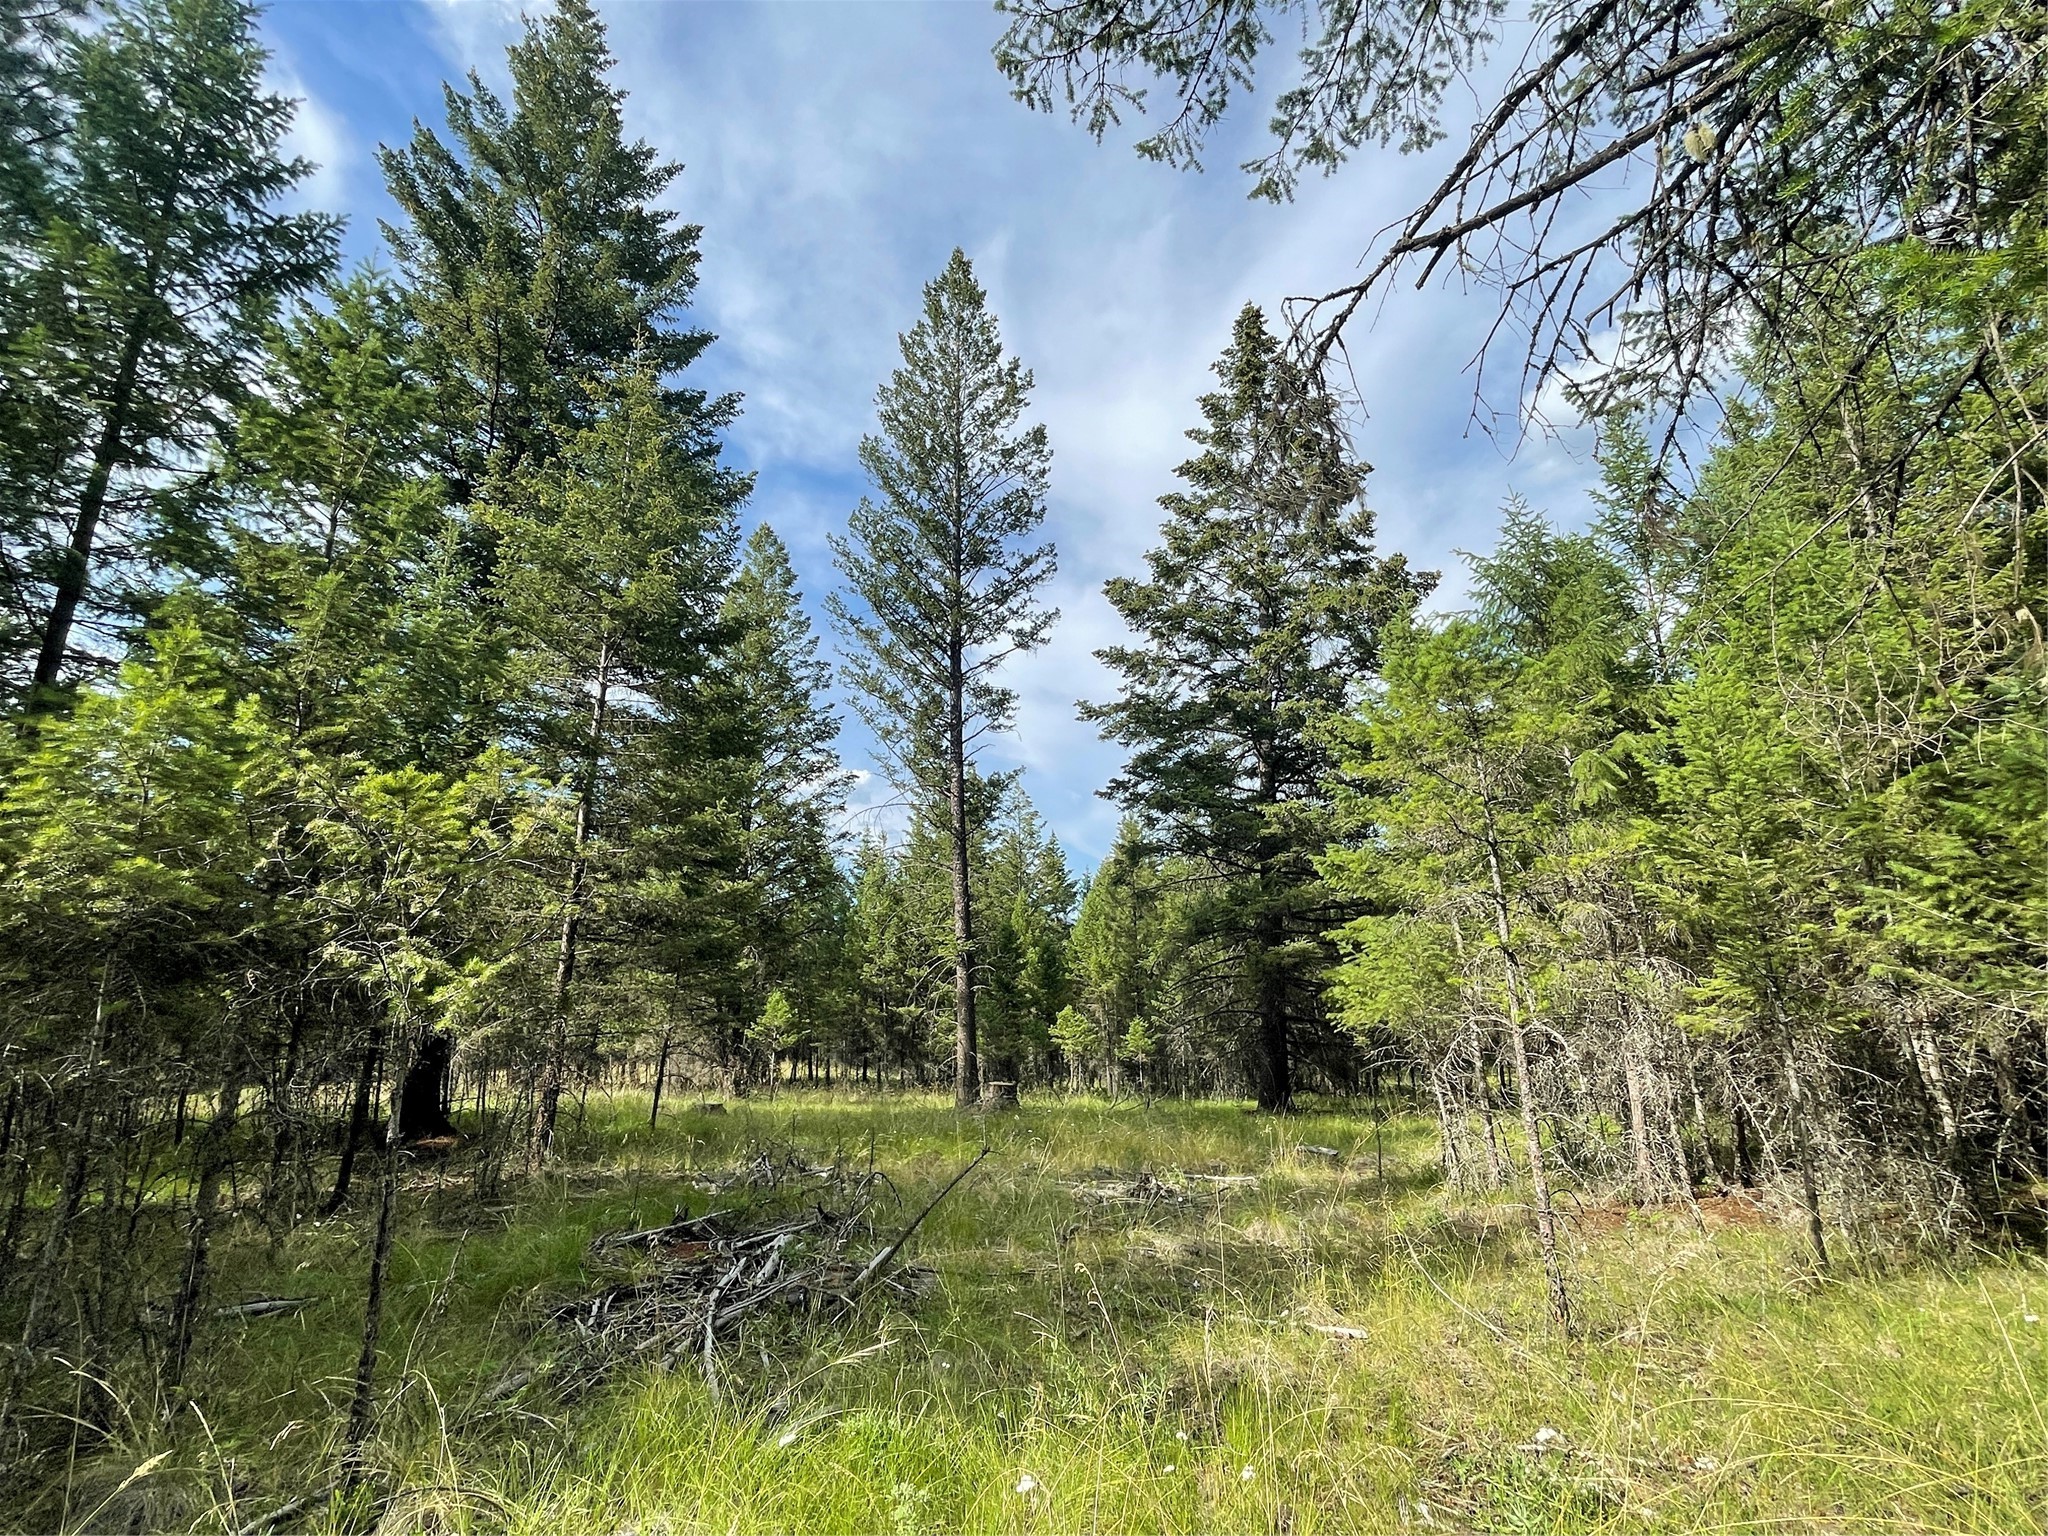 Discover 68.32 wooded acres in Fortine, MT—only 35 minutes from Whitefish and a short 12-minute drive from Eureka. Embrace nature's beauty on this vast, wooded property, offering the perfect blend of seclusion and accessibility. Call Rick @ 406-249-3109 or your real estate professional TODAY!!!